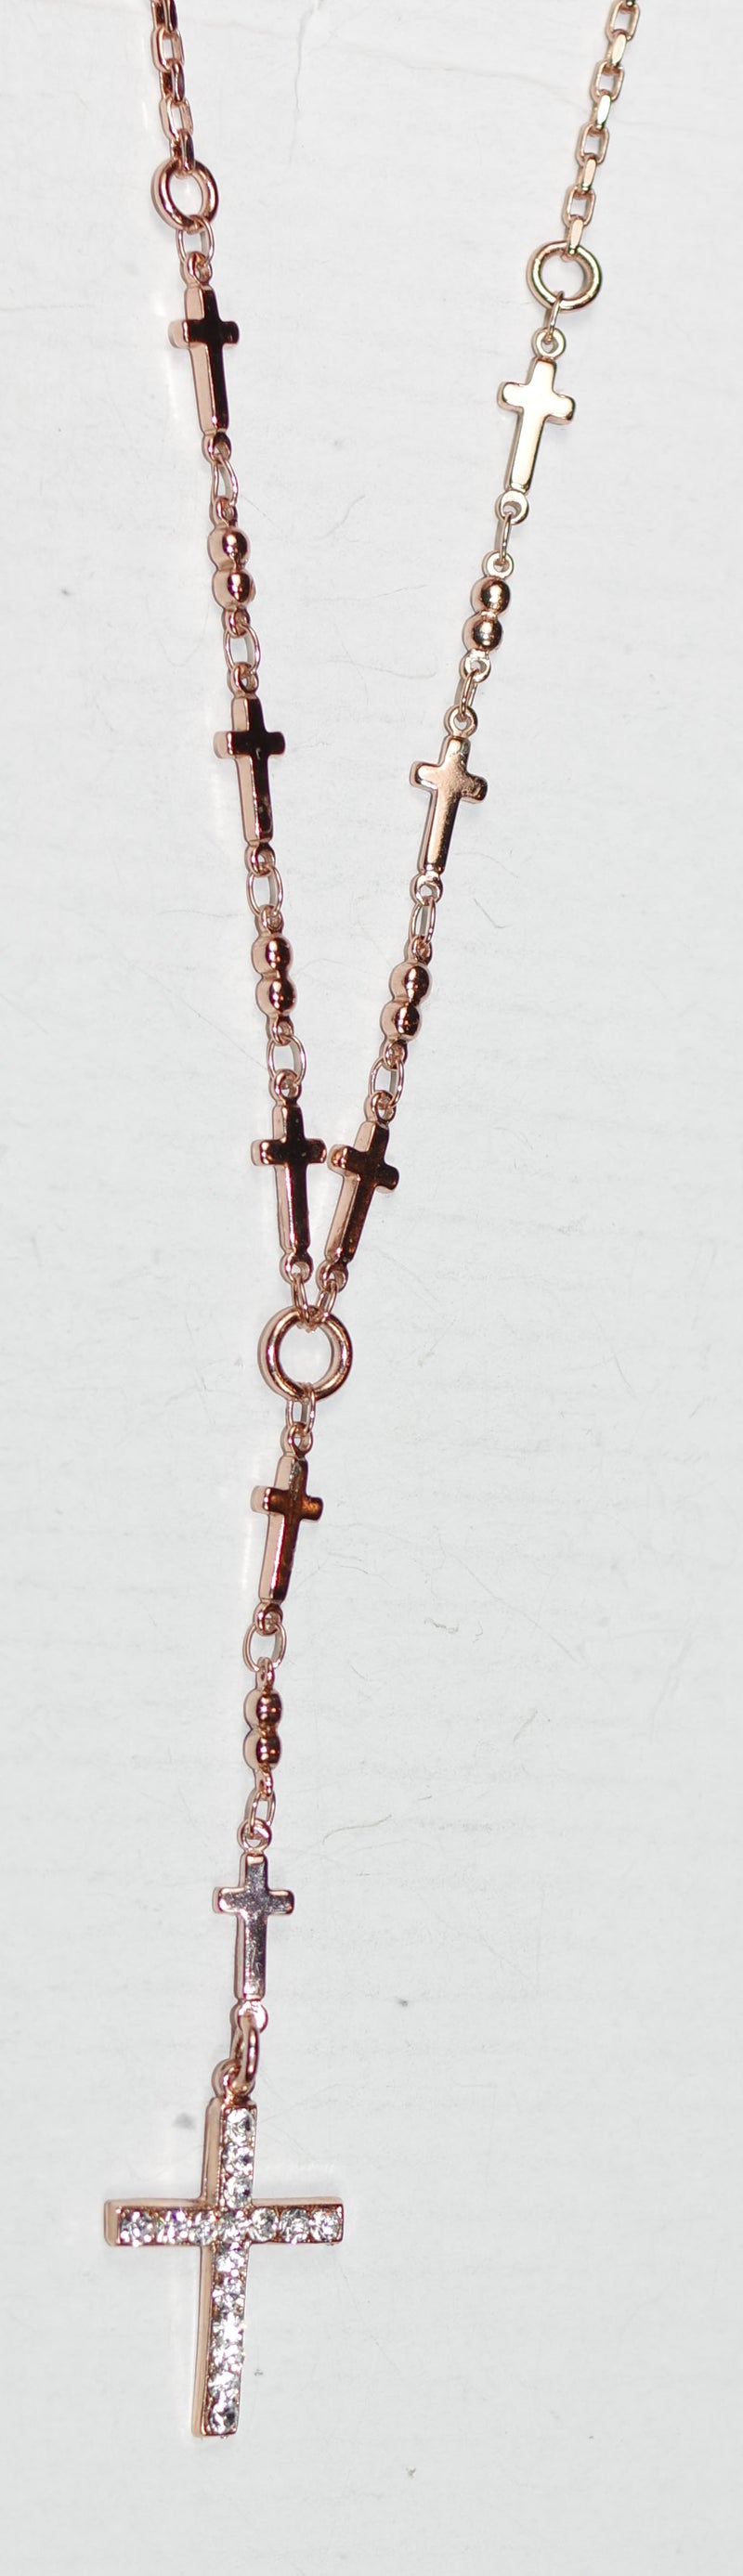 MARIANA CROSS NECKLACE ON A CLEAR DAY: clear stones in rose gold setting, 18" adjustable chain